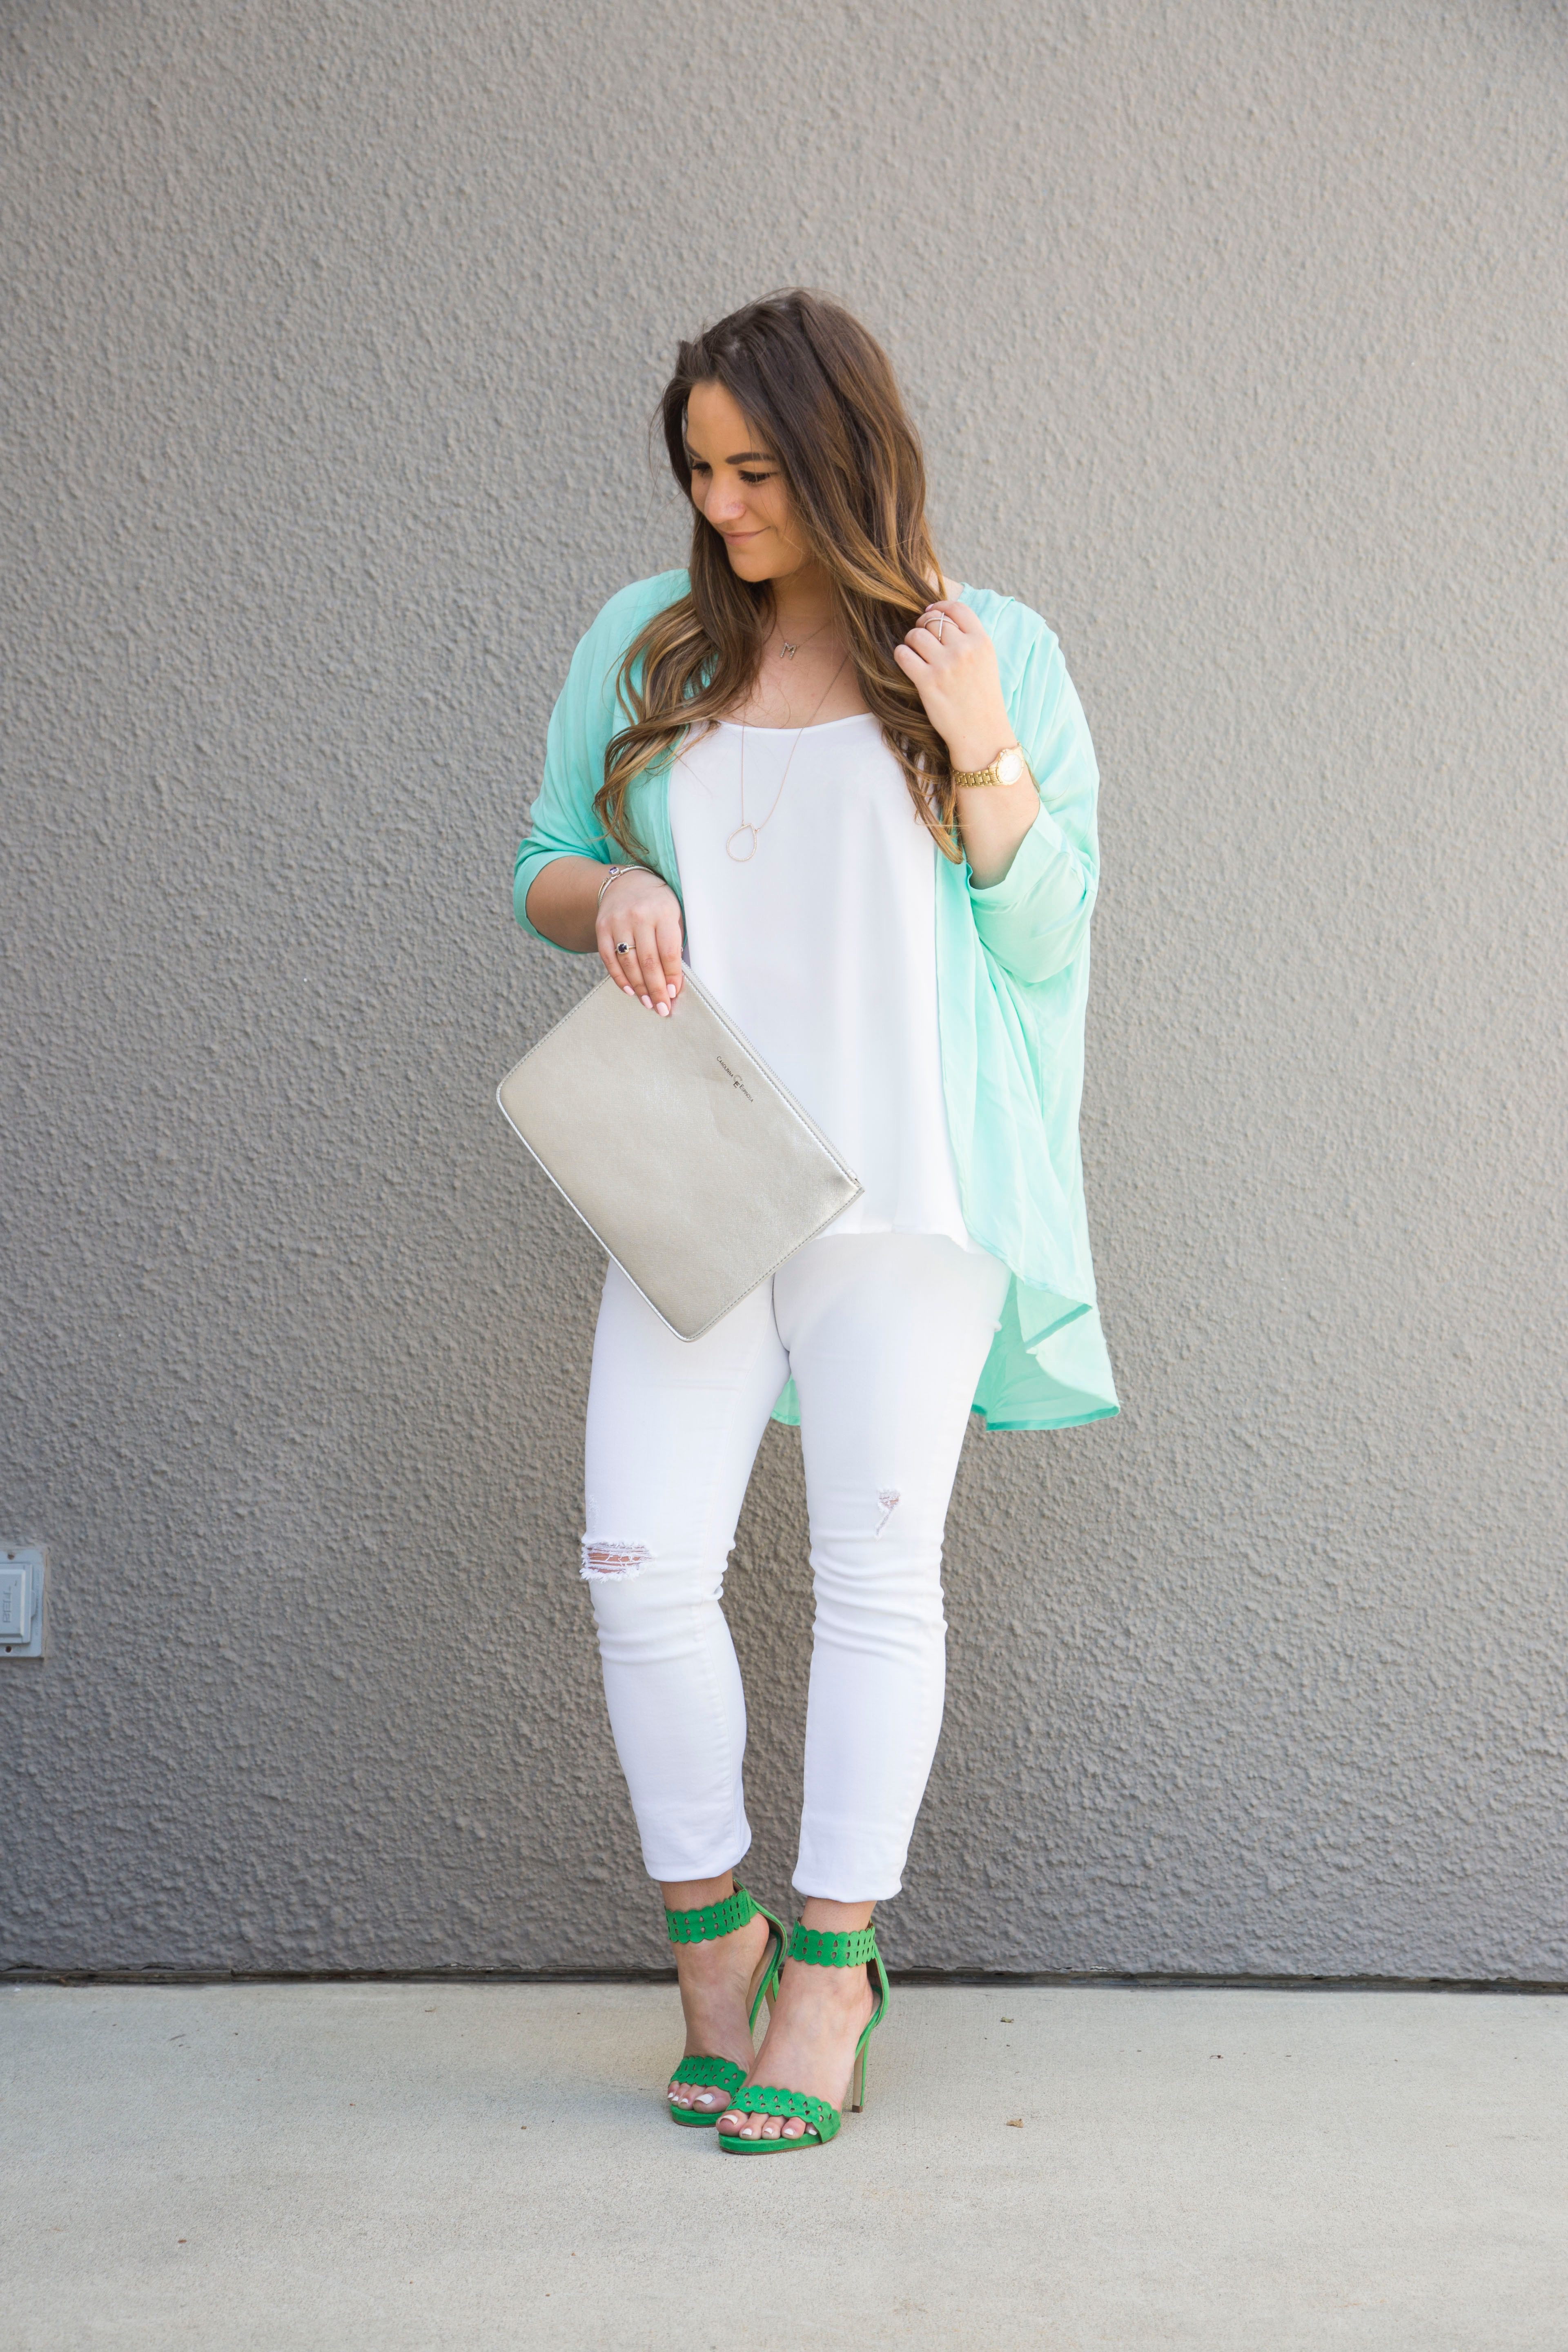 missyonmadison, melissa tierney, st pattys day, st patricks day, st patricks day outfit inspo, outfit inspo, fashion blog, fashion blogger, style blogger, style blog, green heels, green ankle strap sandals, metallic clutch, silver clutch, all for color, turqoise kimono, green kimono, white skinny jeans, old navy rockstar jeans, white chiffon camisole, apt 9 georgette camisole, kohls, old navy, green shoes, green sandals, hair goals, la blogger,